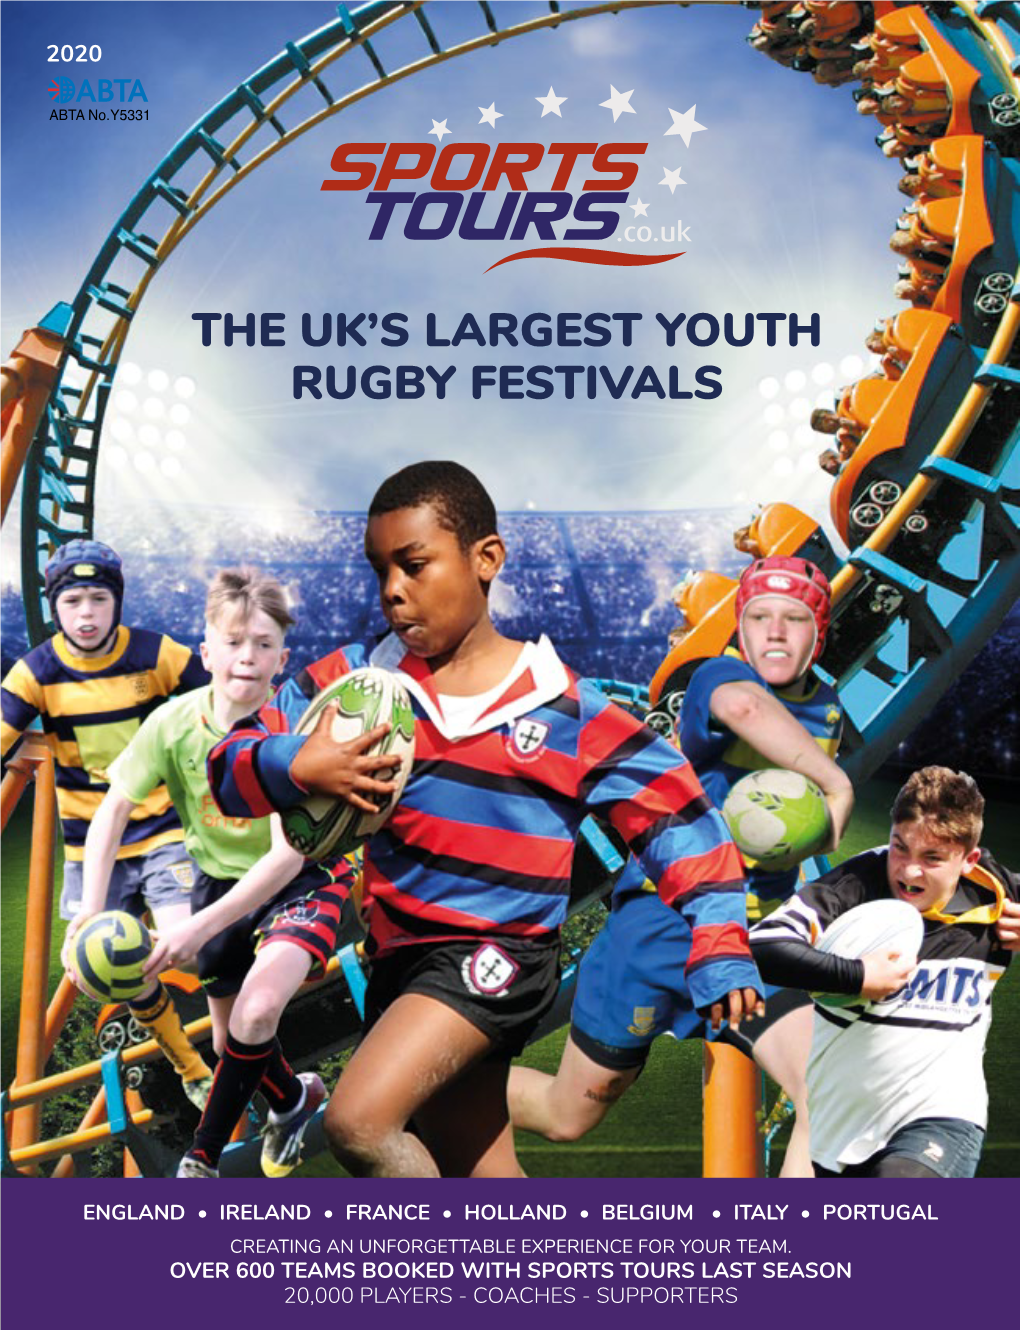 The Uk's Largest Youth Rugby Festivals